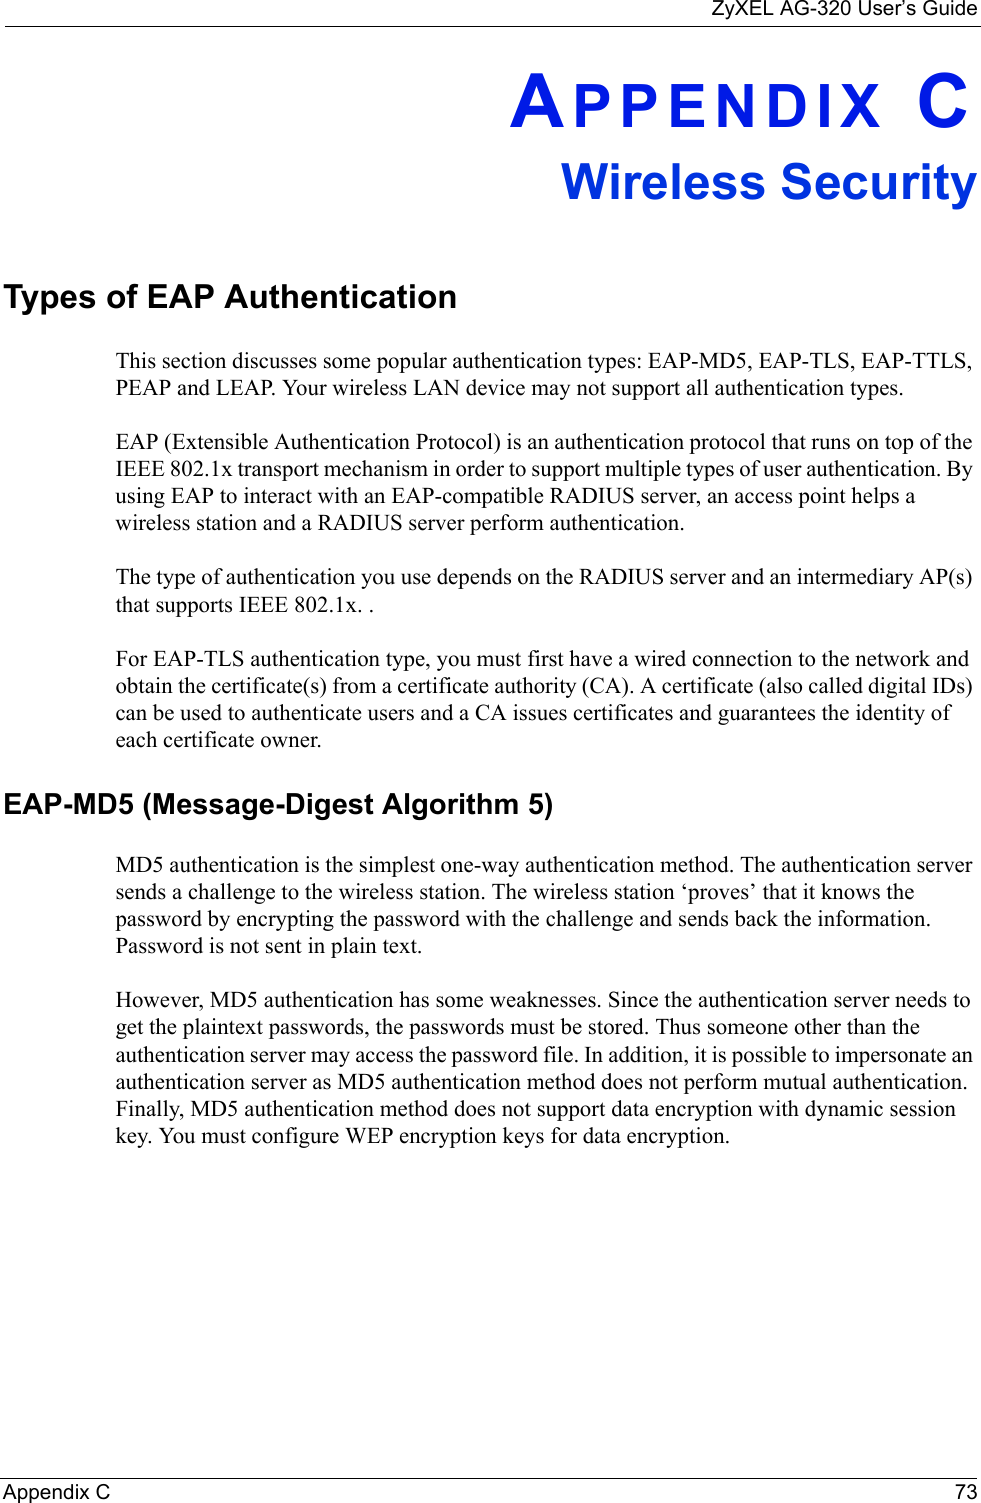 ZyXEL AG-320 User’s GuideAppendix C 73APPENDIX CWireless SecurityTypes of EAP AuthenticationThis section discusses some popular authentication types: EAP-MD5, EAP-TLS, EAP-TTLS, PEAP and LEAP. Your wireless LAN device may not support all authentication types. EAP (Extensible Authentication Protocol) is an authentication protocol that runs on top of the IEEE 802.1x transport mechanism in order to support multiple types of user authentication. By using EAP to interact with an EAP-compatible RADIUS server, an access point helps a wireless station and a RADIUS server perform authentication. The type of authentication you use depends on the RADIUS server and an intermediary AP(s) that supports IEEE 802.1x. .For EAP-TLS authentication type, you must first have a wired connection to the network and obtain the certificate(s) from a certificate authority (CA). A certificate (also called digital IDs) can be used to authenticate users and a CA issues certificates and guarantees the identity of each certificate owner.EAP-MD5 (Message-Digest Algorithm 5)MD5 authentication is the simplest one-way authentication method. The authentication server sends a challenge to the wireless station. The wireless station ‘proves’ that it knows the password by encrypting the password with the challenge and sends back the information. Password is not sent in plain text. However, MD5 authentication has some weaknesses. Since the authentication server needs to get the plaintext passwords, the passwords must be stored. Thus someone other than the authentication server may access the password file. In addition, it is possible to impersonate an authentication server as MD5 authentication method does not perform mutual authentication. Finally, MD5 authentication method does not support data encryption with dynamic session key. You must configure WEP encryption keys for data encryption. 